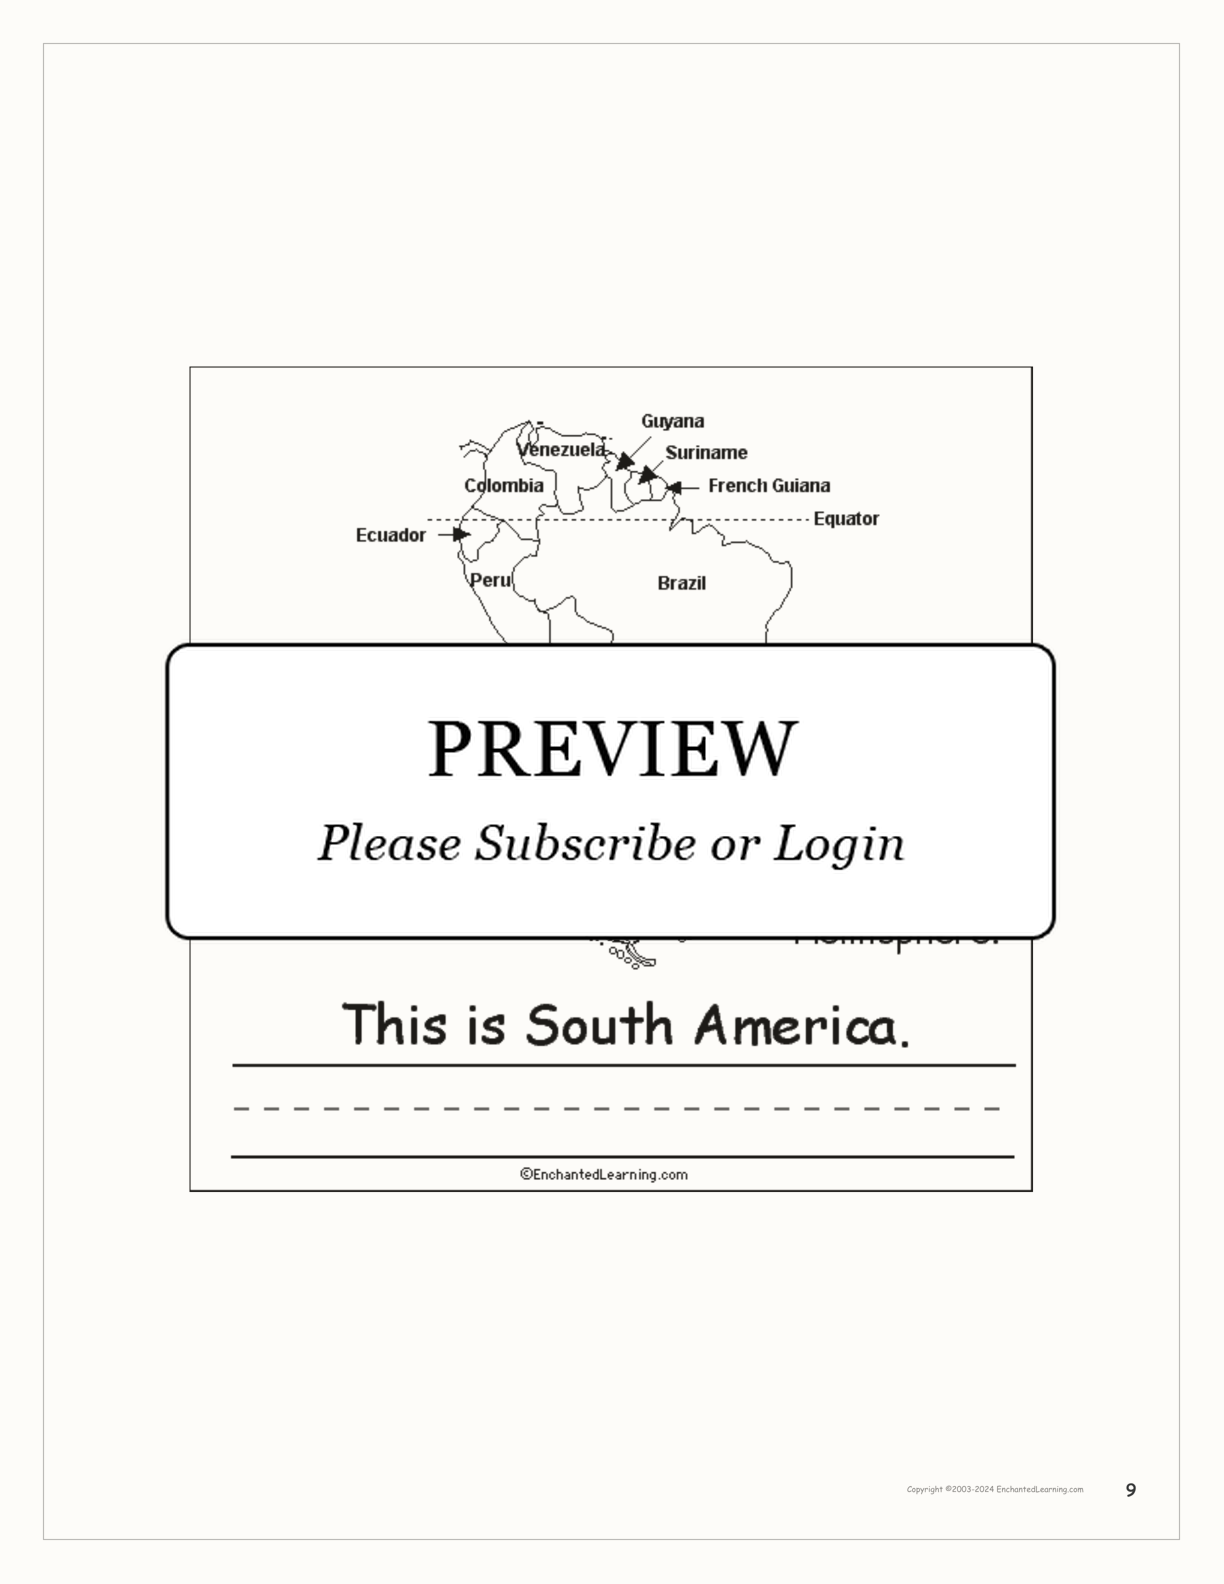 The Seven Continents Book interactive printout page 9